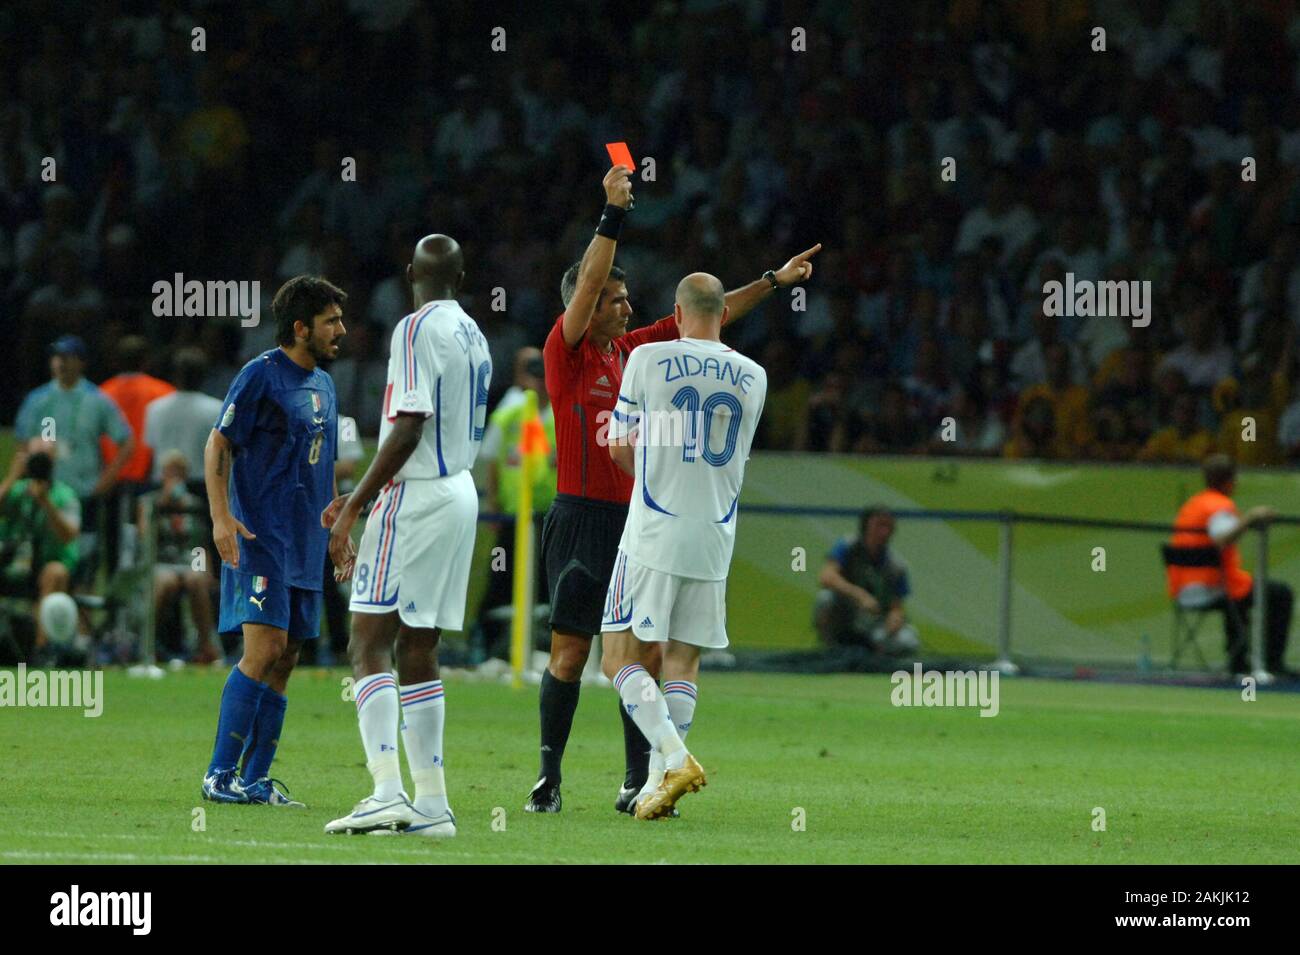 Berlin Germany, 07/09/2006: FIFA World Cup Germany 2006, Italy-France Final Olympiastadion: The referee Horacio Elizondo shows the red card to Zinedine Zidane and expels him for the foul on Marco Materazzi Stock Photo